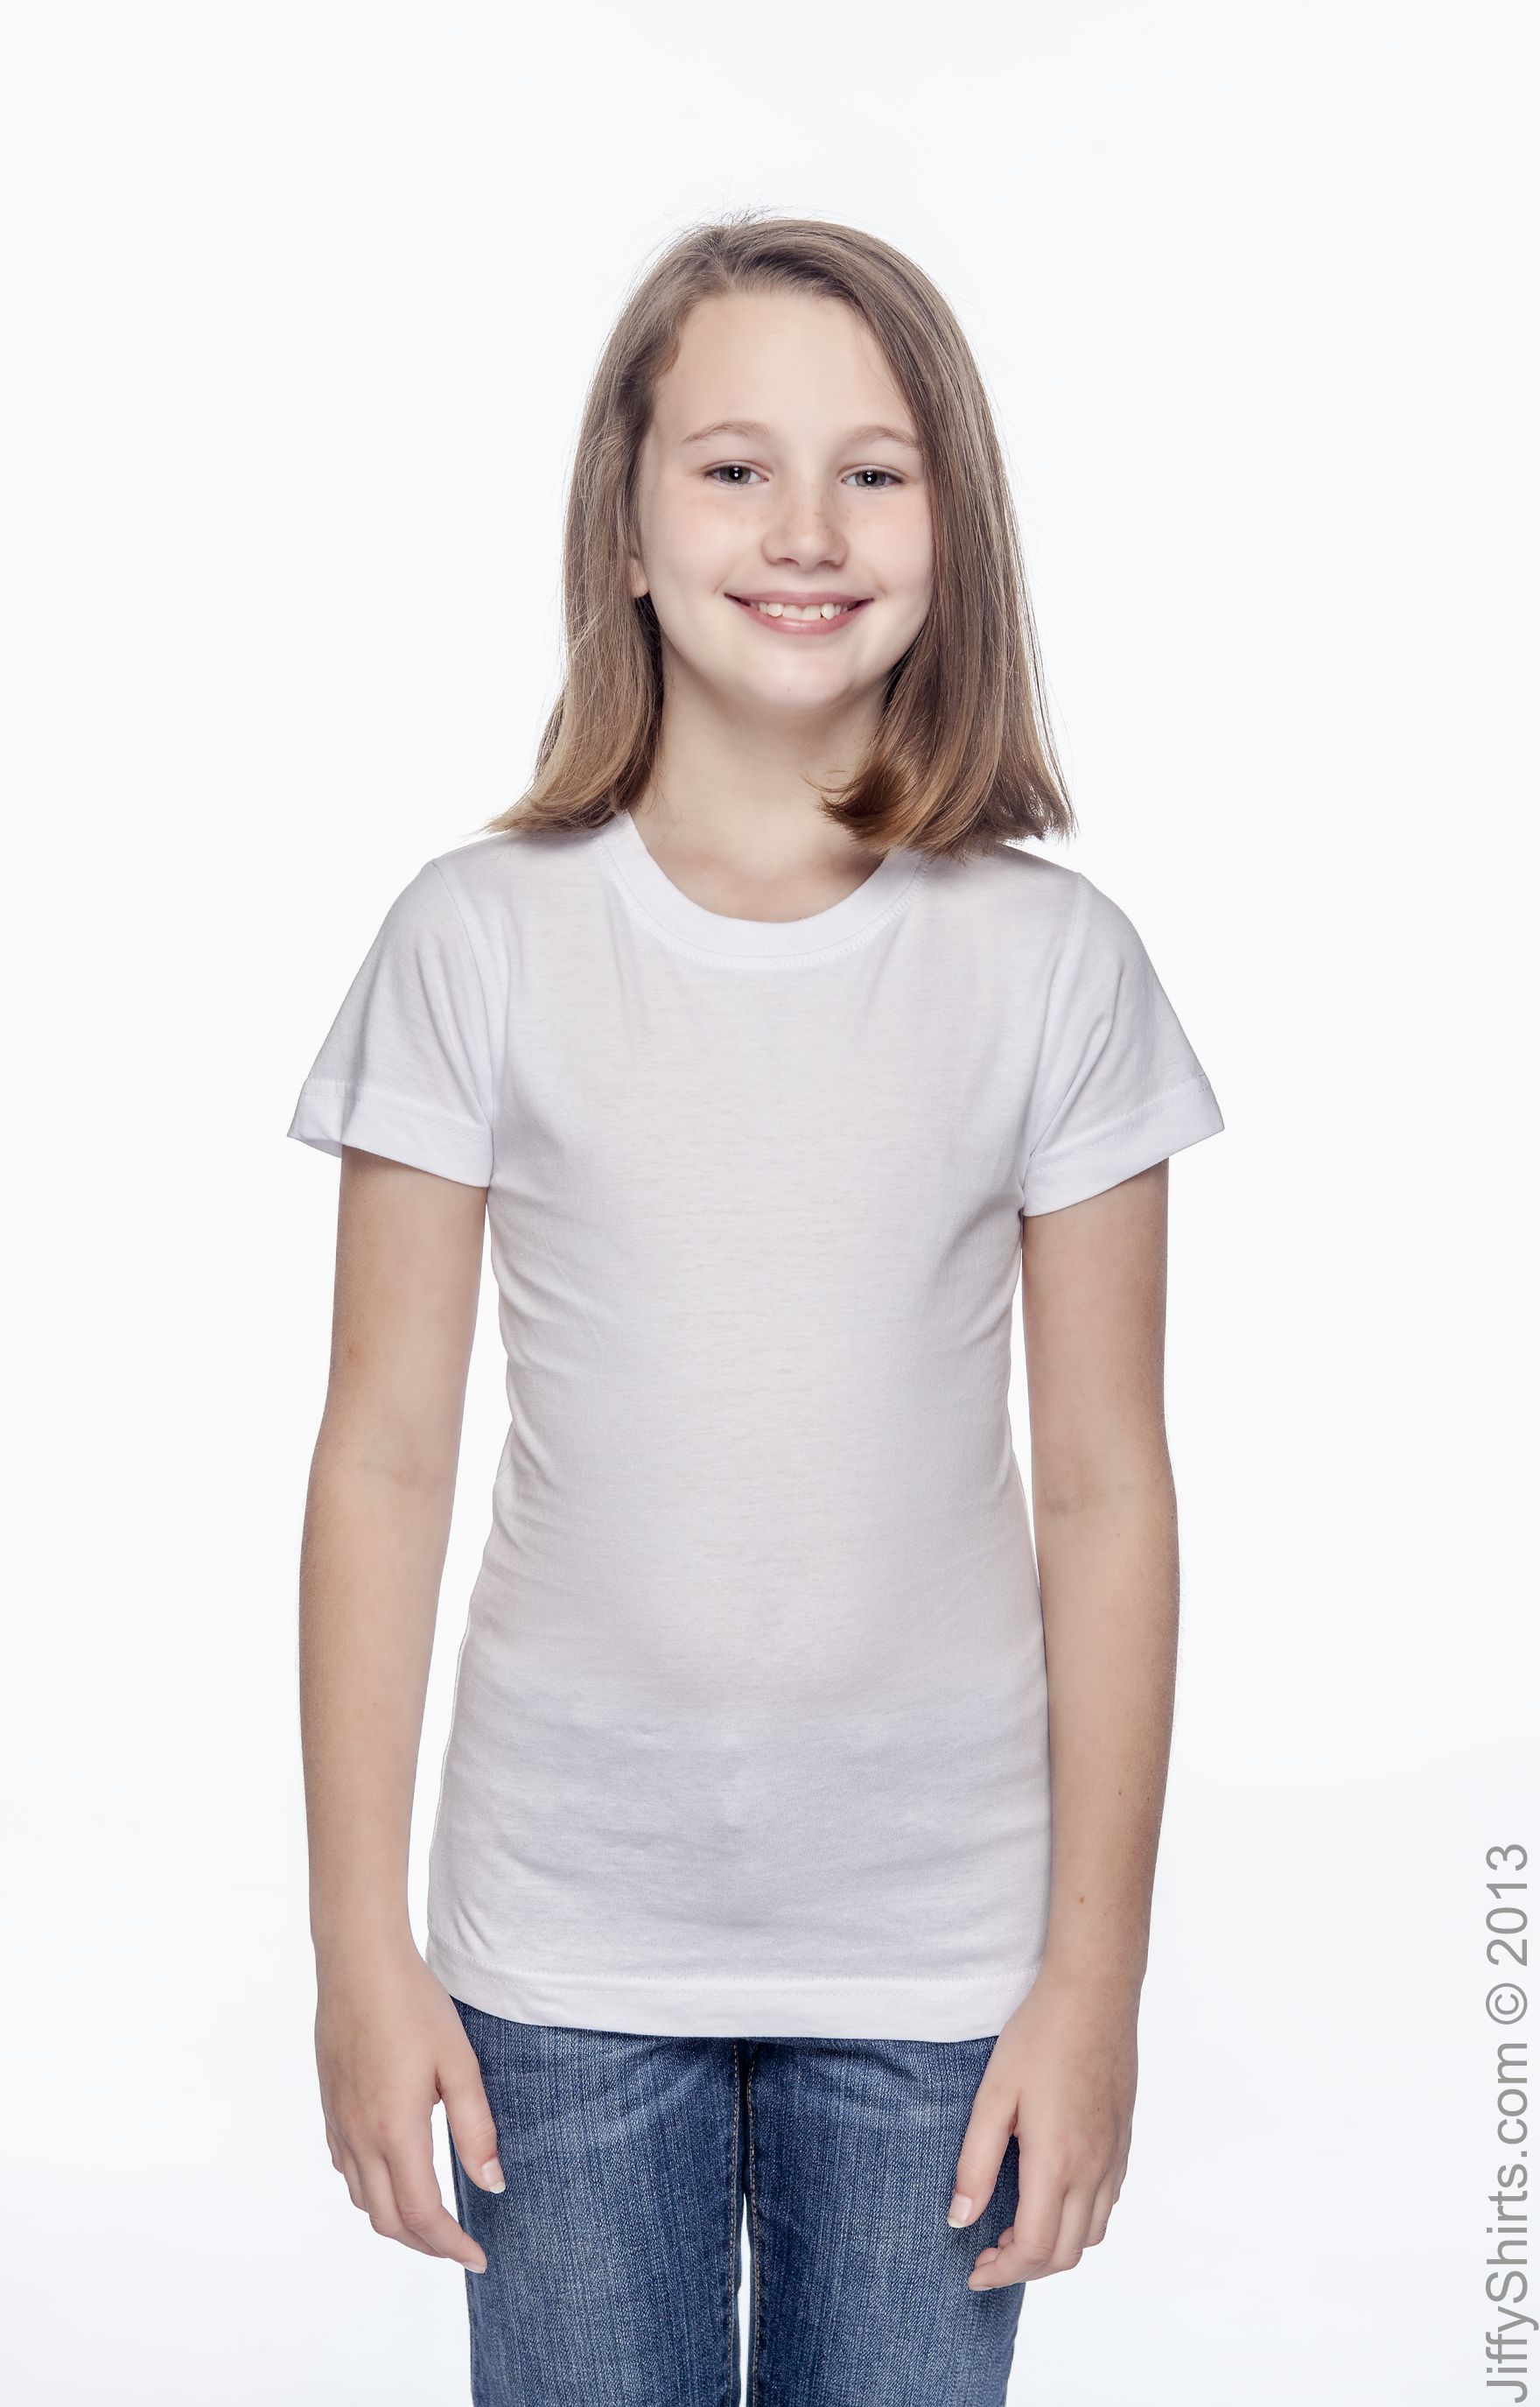 t-shirts for girls 2015